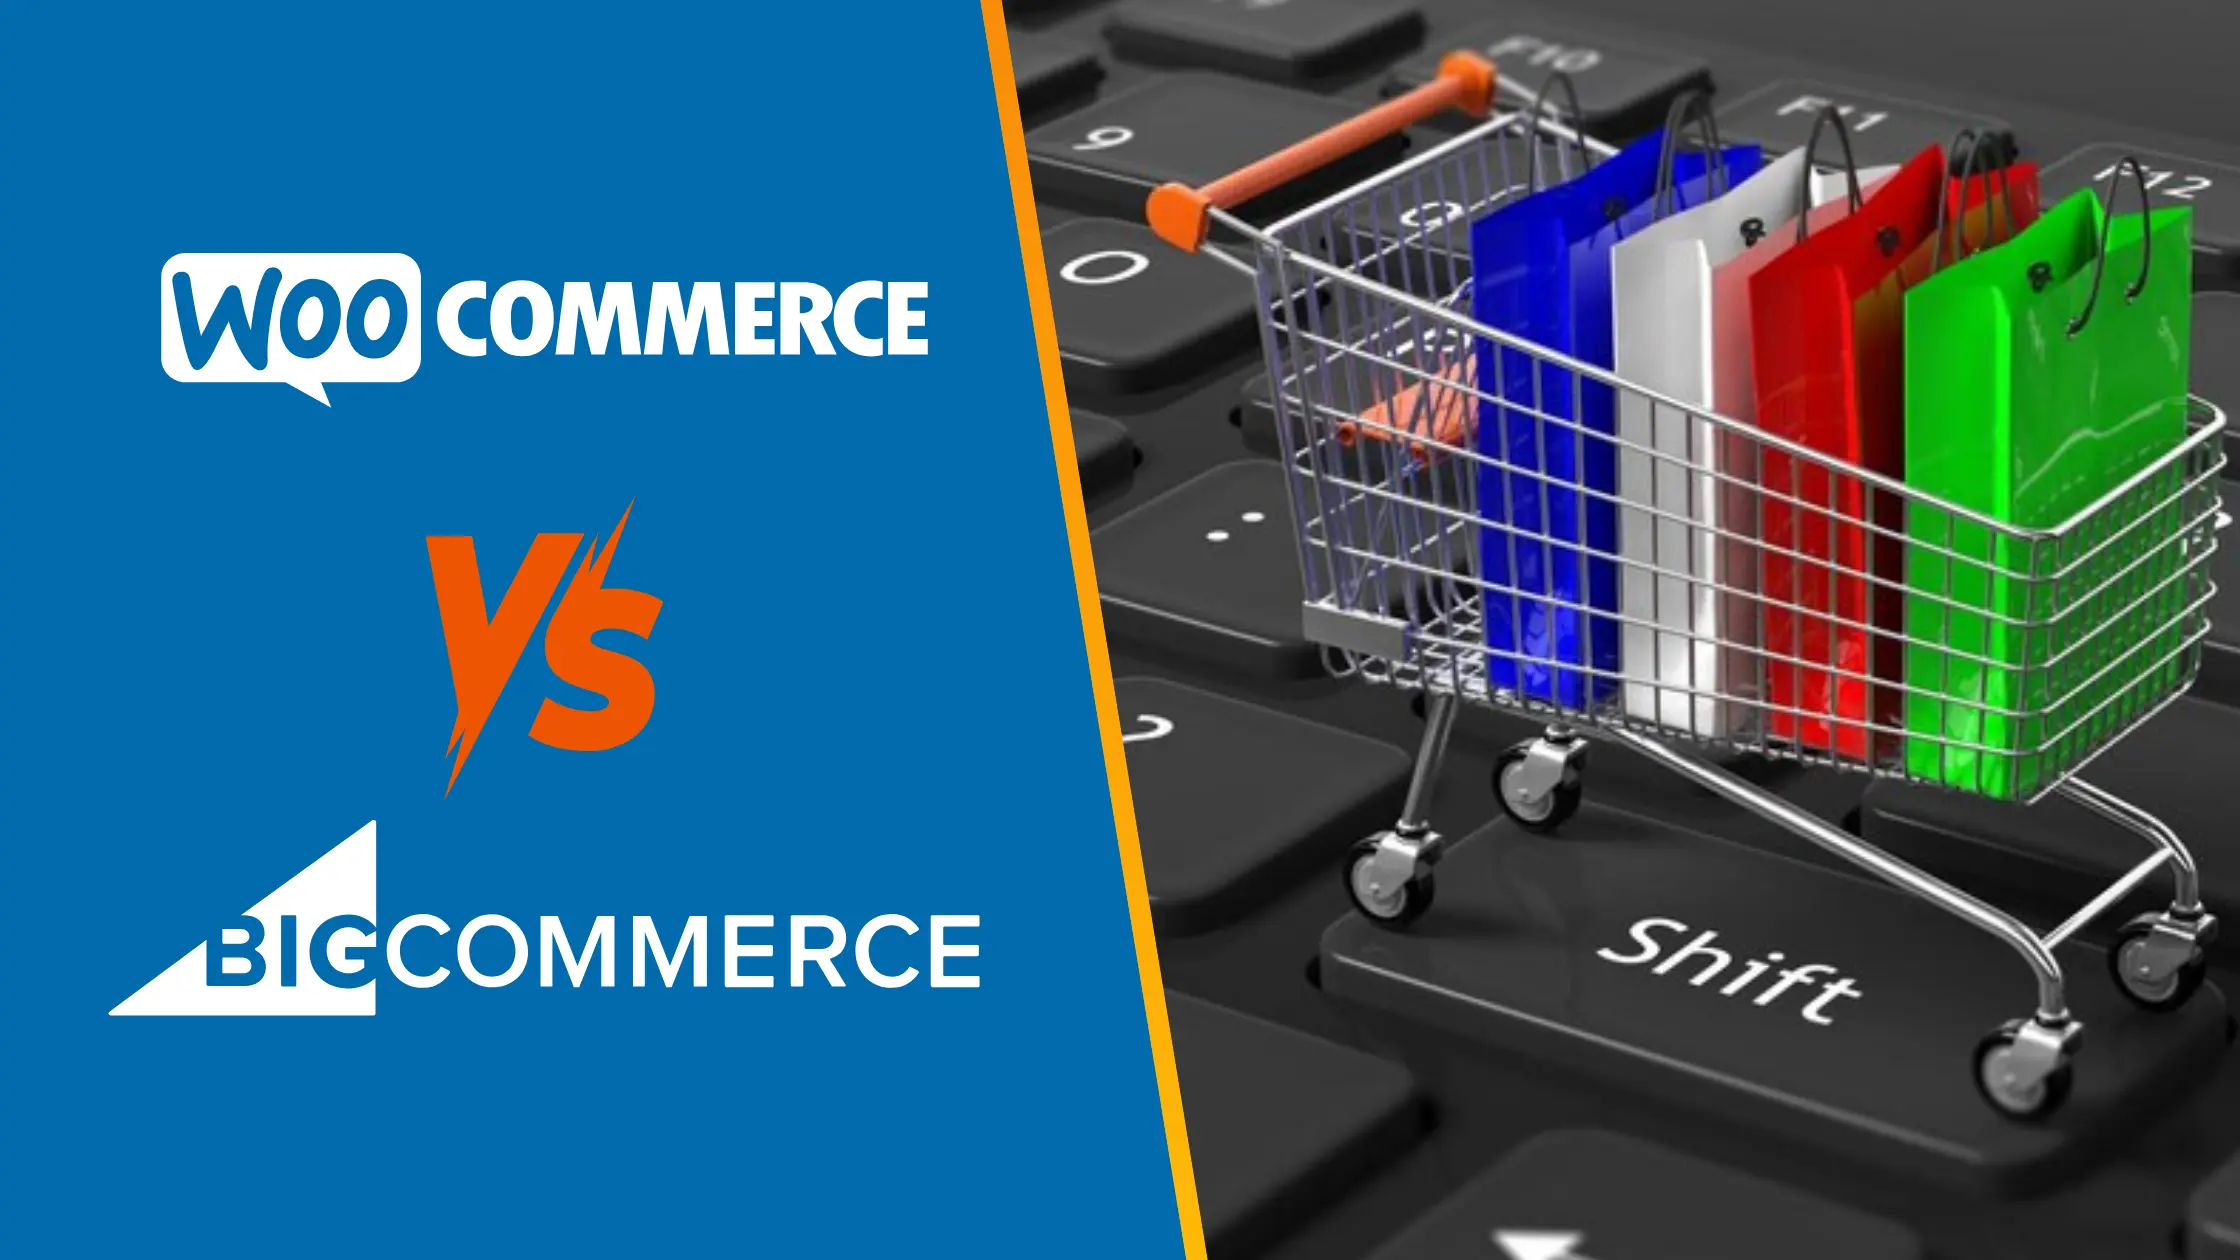 WooCommerce vs. Bigcommerce: Which one should you choose?